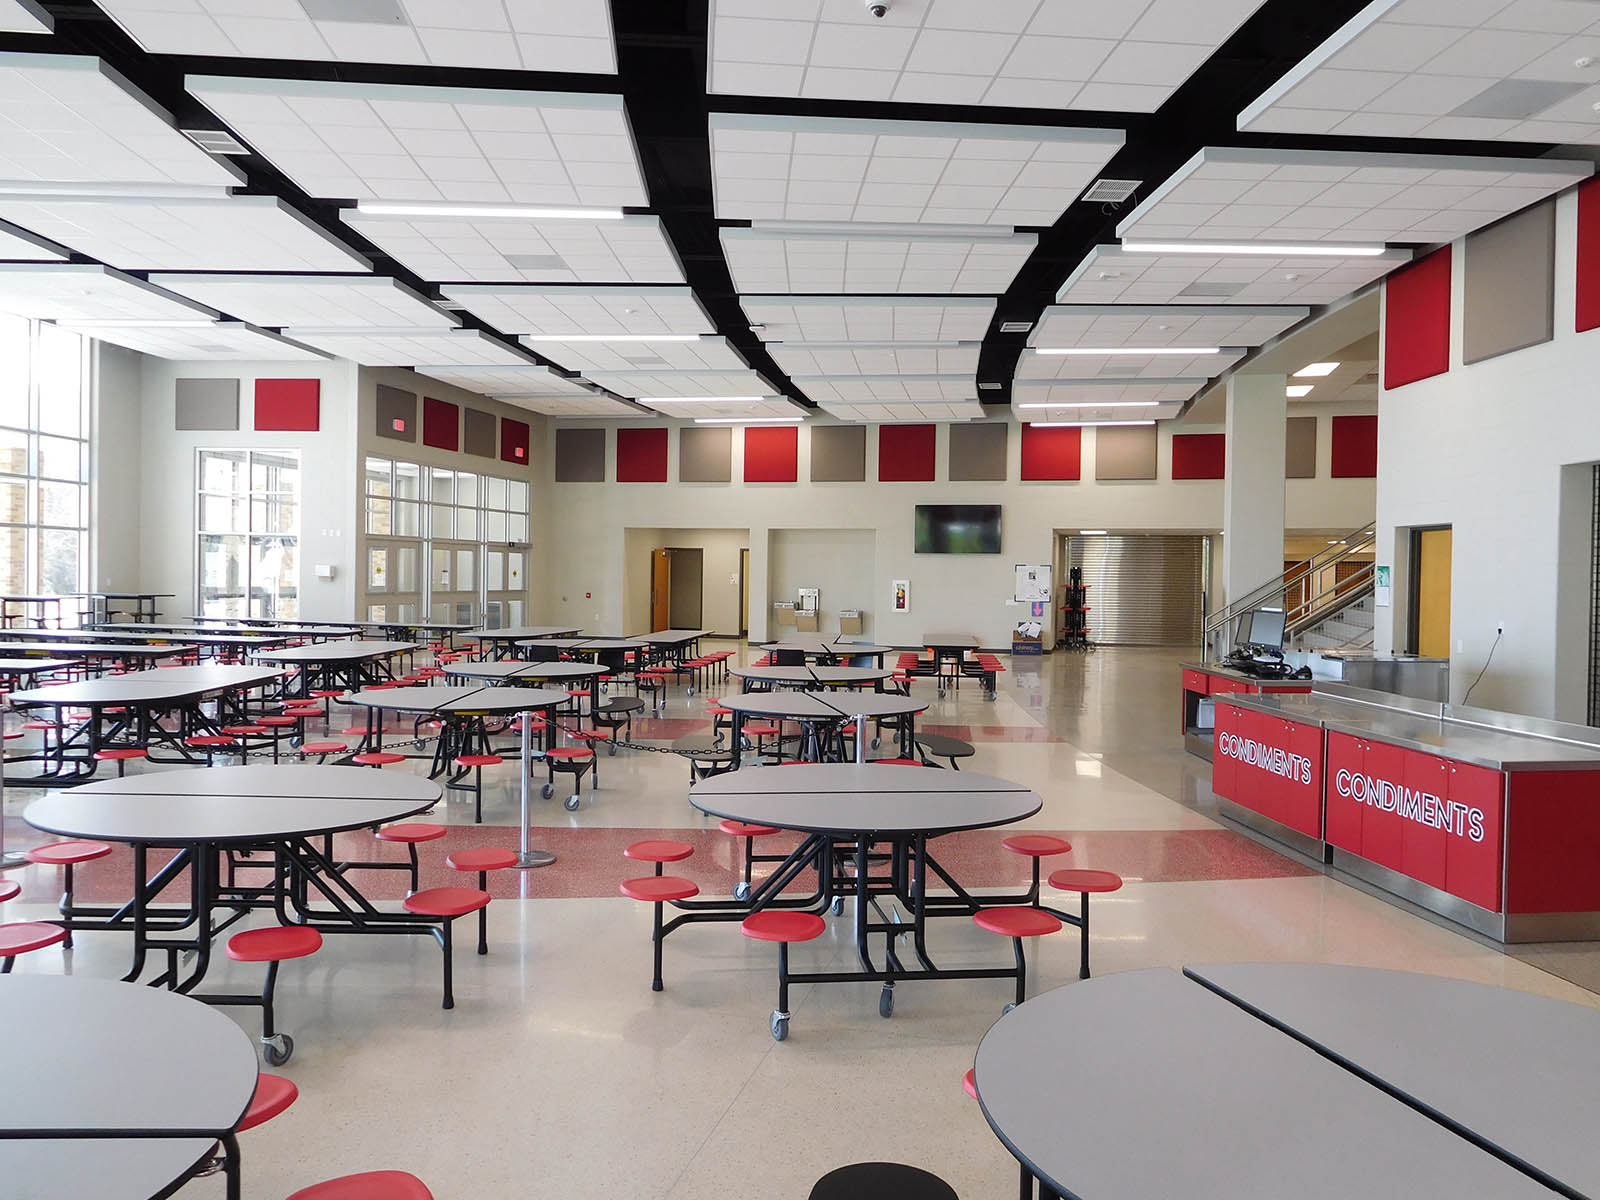 Cafeteria filled with tables at the Edison Middle School